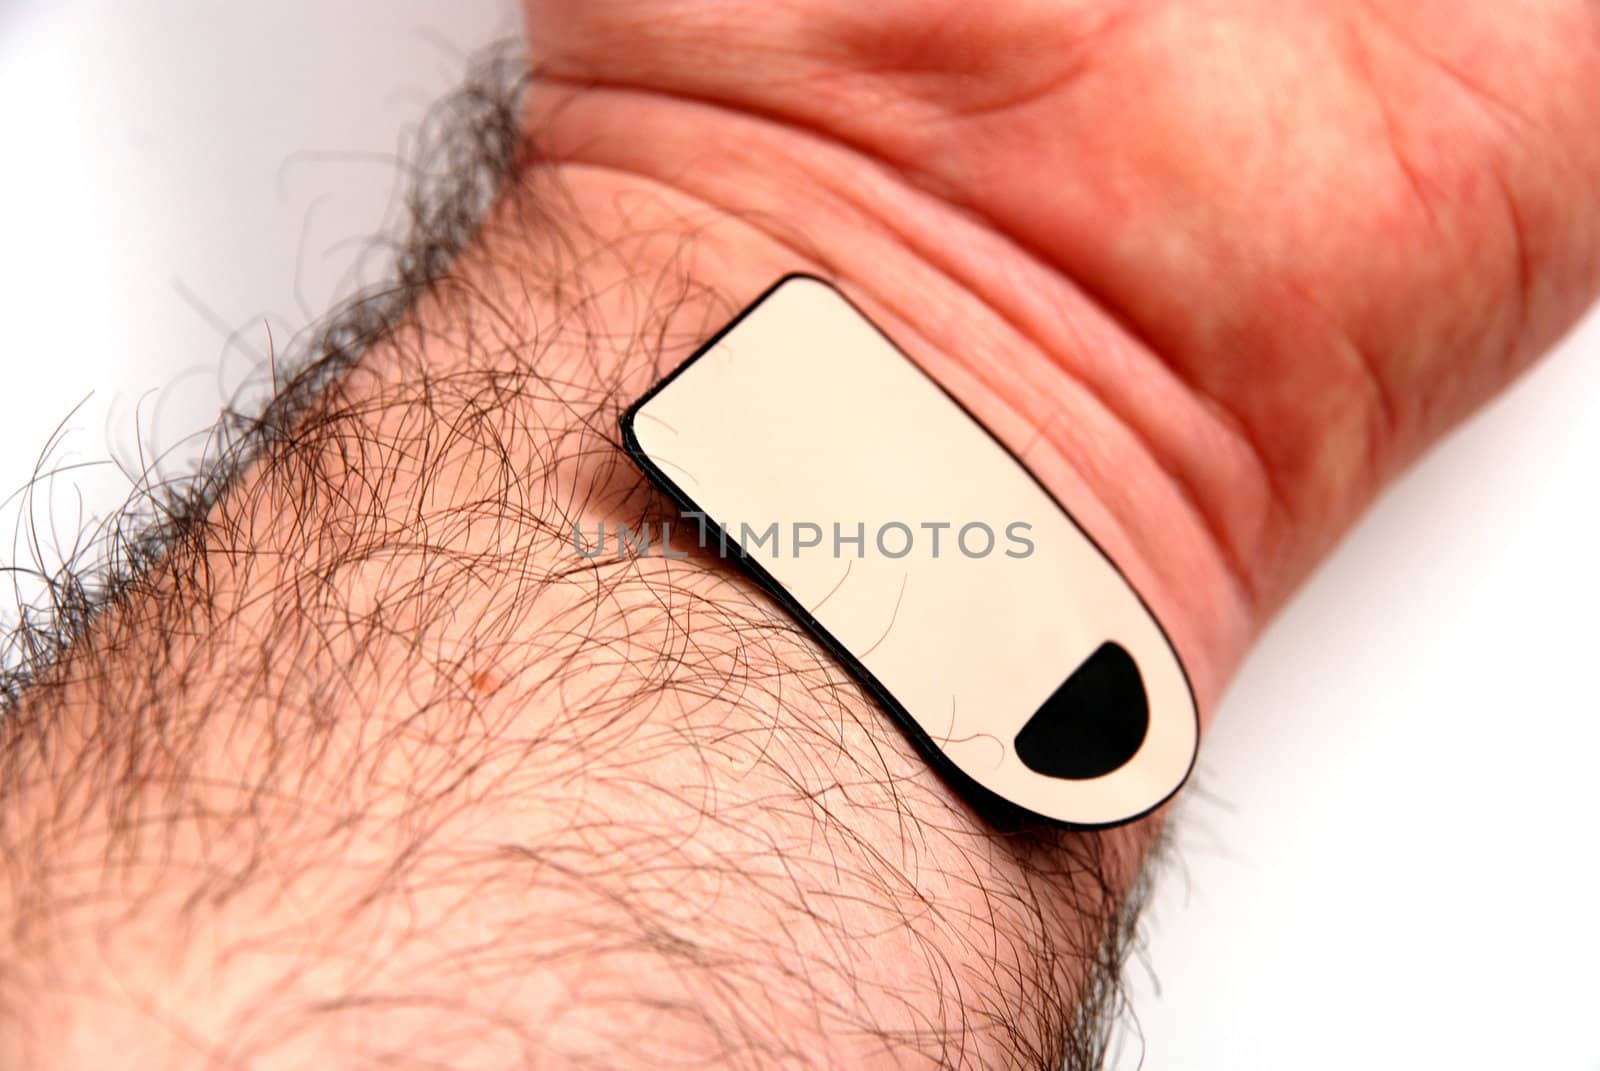 Stock pictures of electrodes used in a variety of medical equipment